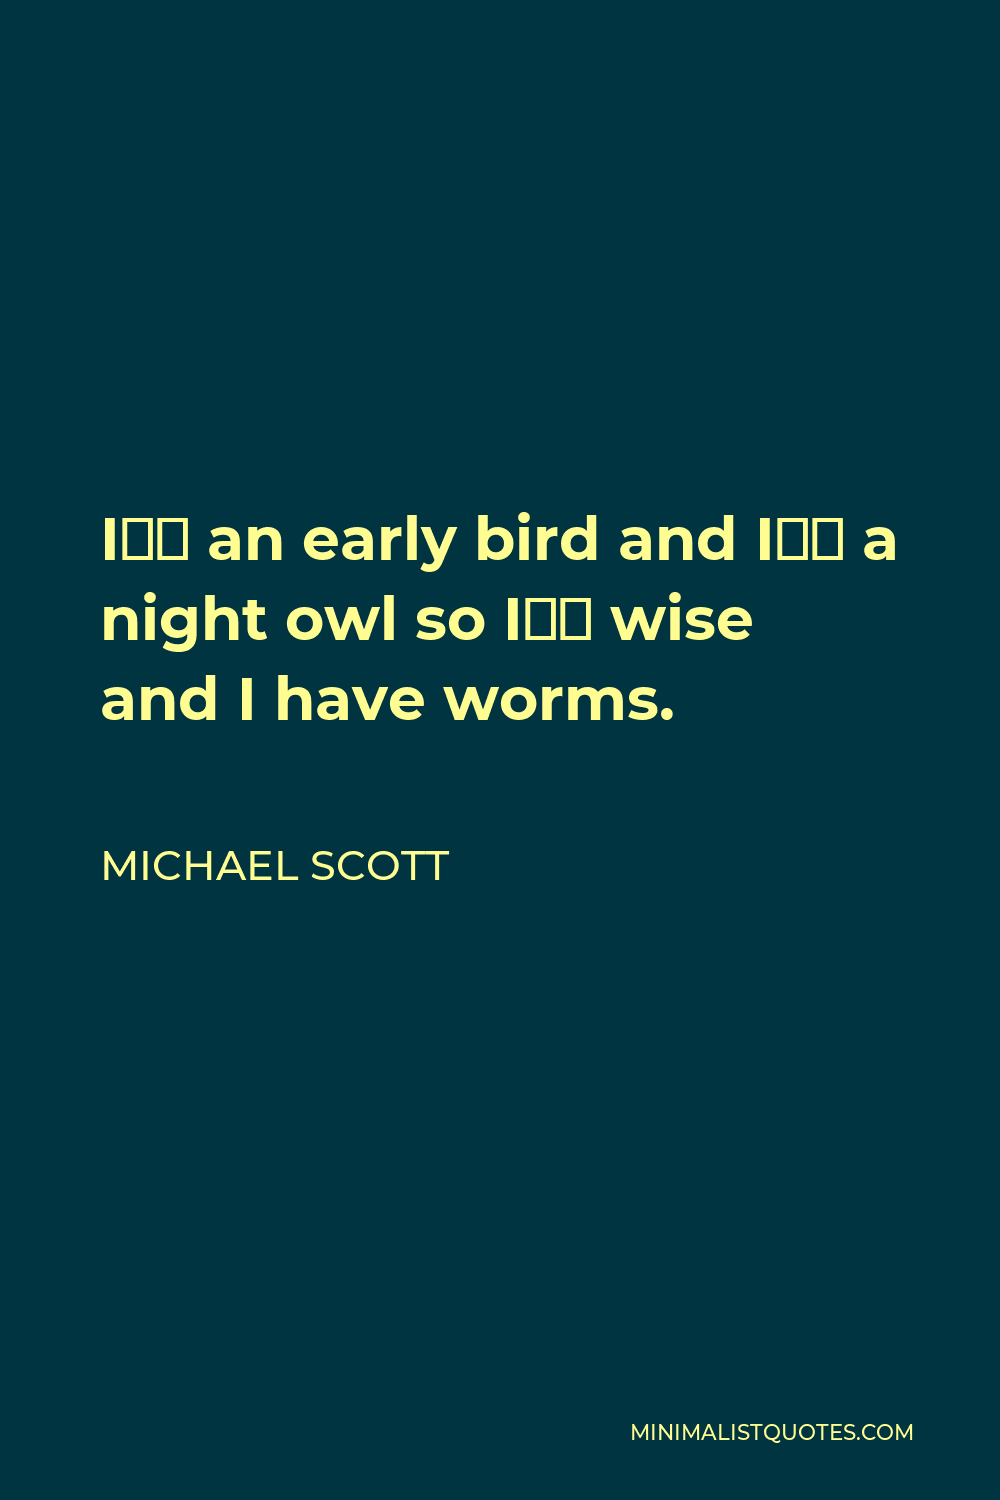 Michael Scott Quote Im An Early Bird And Im A Night Owl So Im Wise And I Have Worms